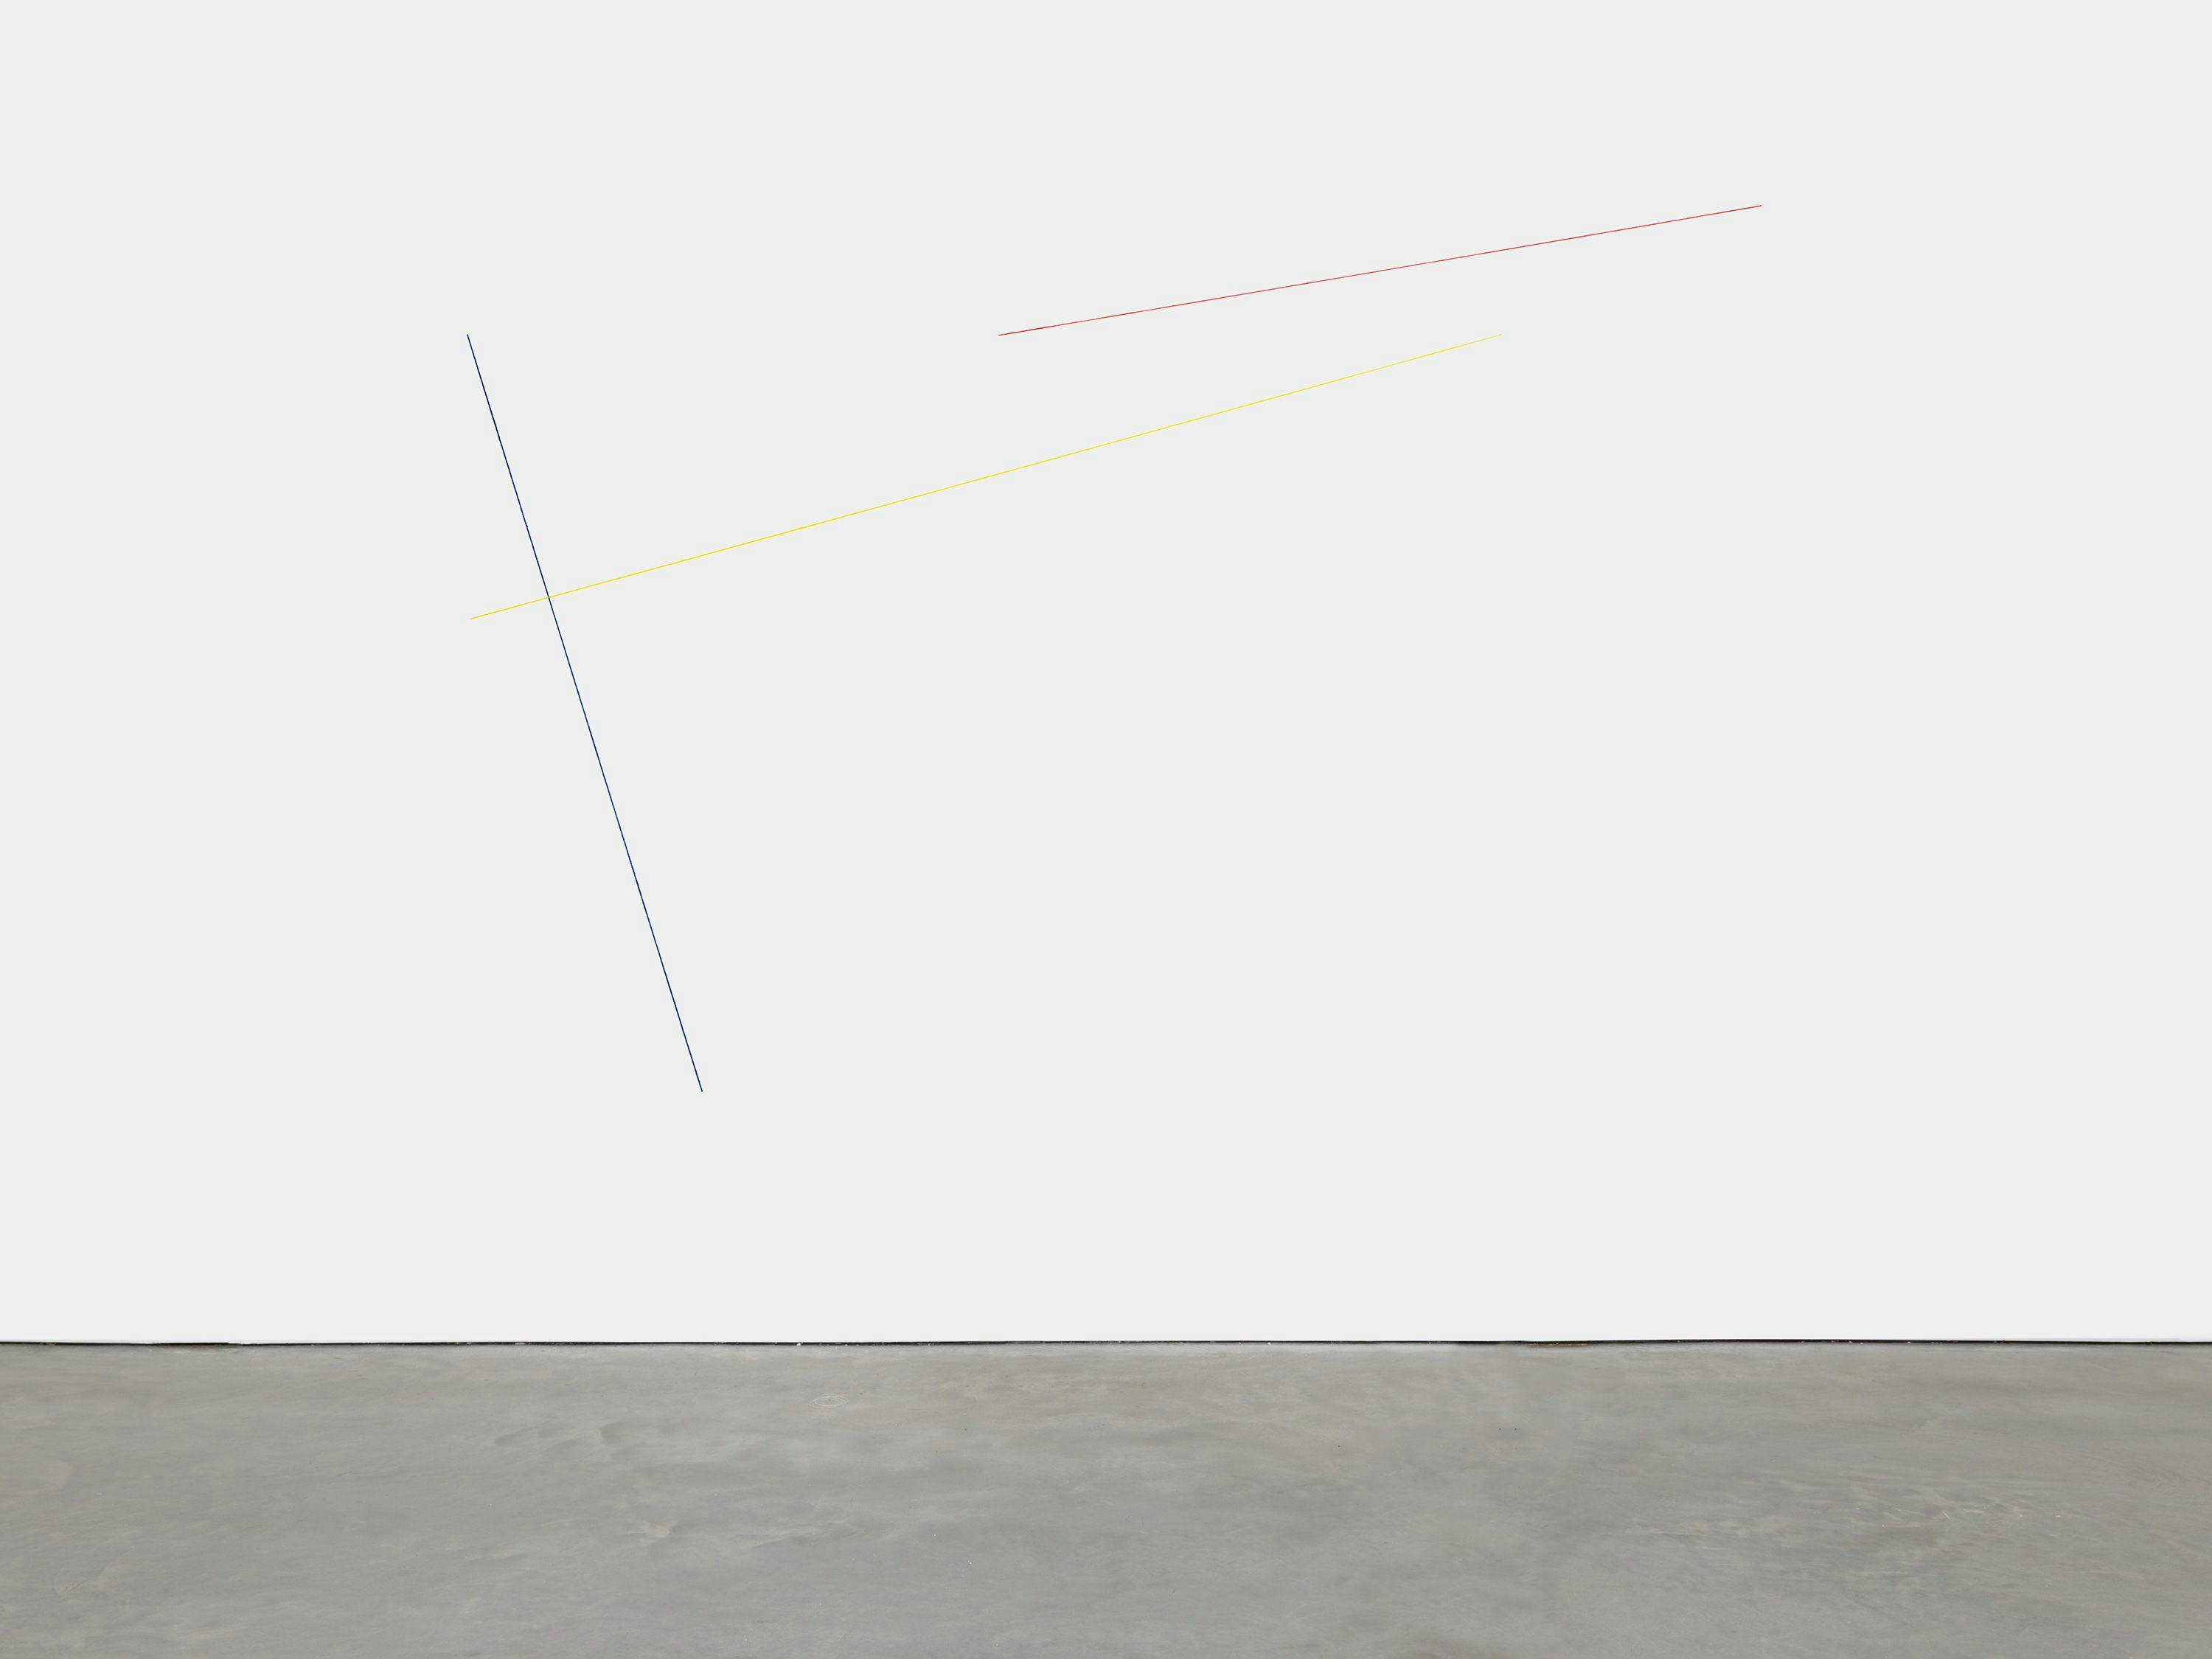 A blue, yellow, and red acrylic yarn artwork by Fred Sandback, titled Untitled (Sculptural Study, Three-part Wall Construction), 1985 and 2018.